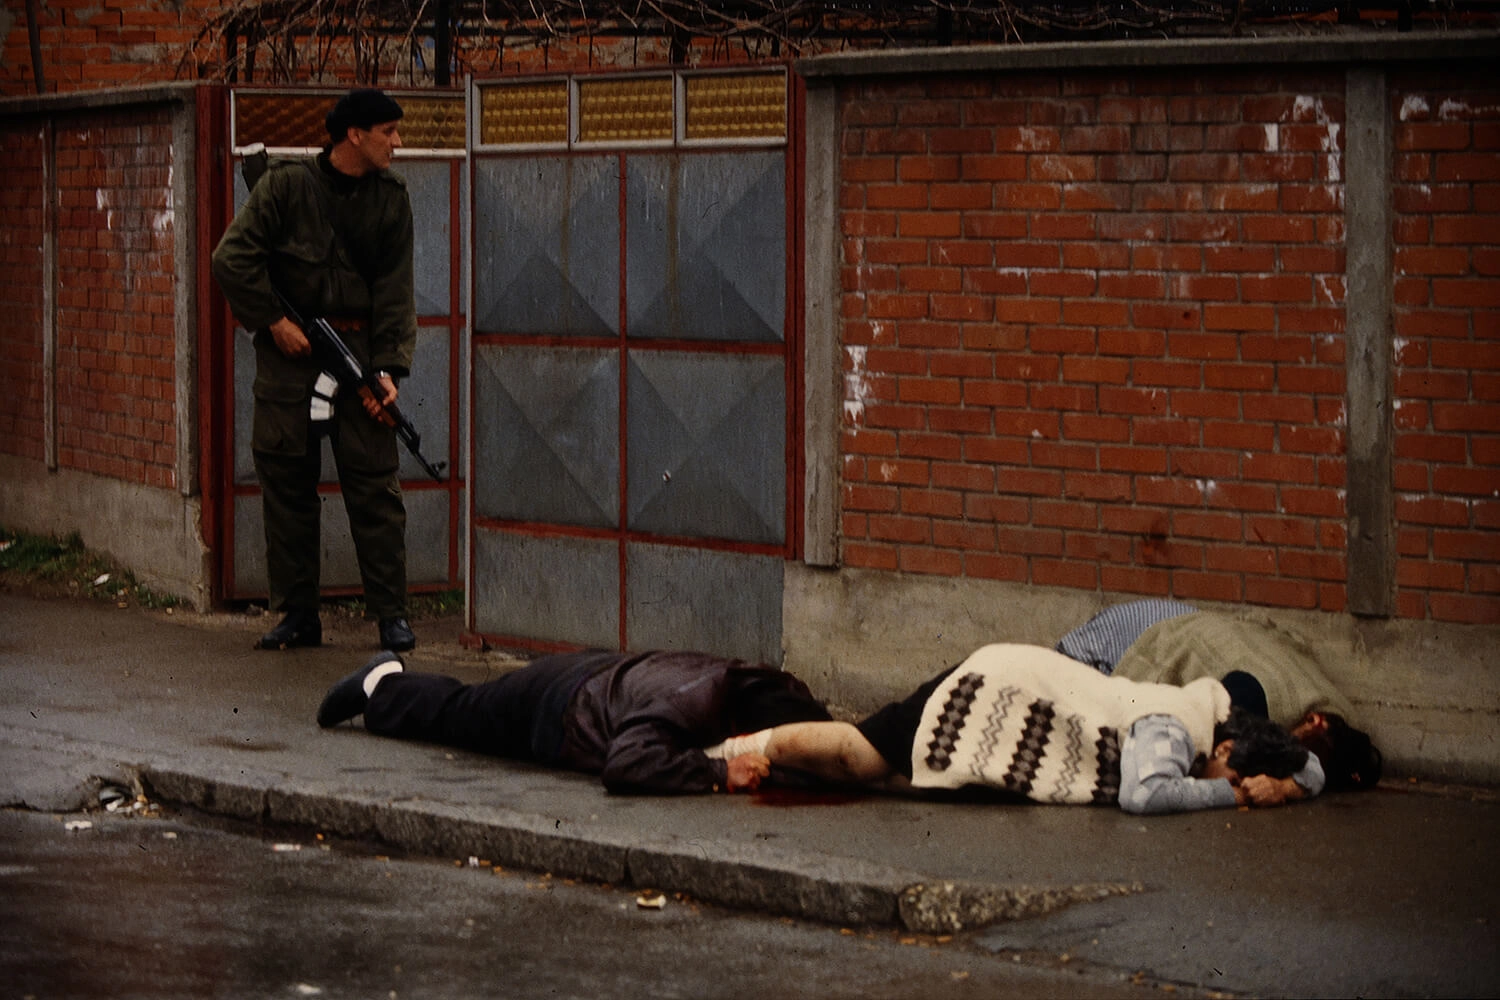 Civilians lie on the ground after they were gunned down in Bijeljina, on April 2, 1992. An armed member of Arkan's Tigers walks behind them.